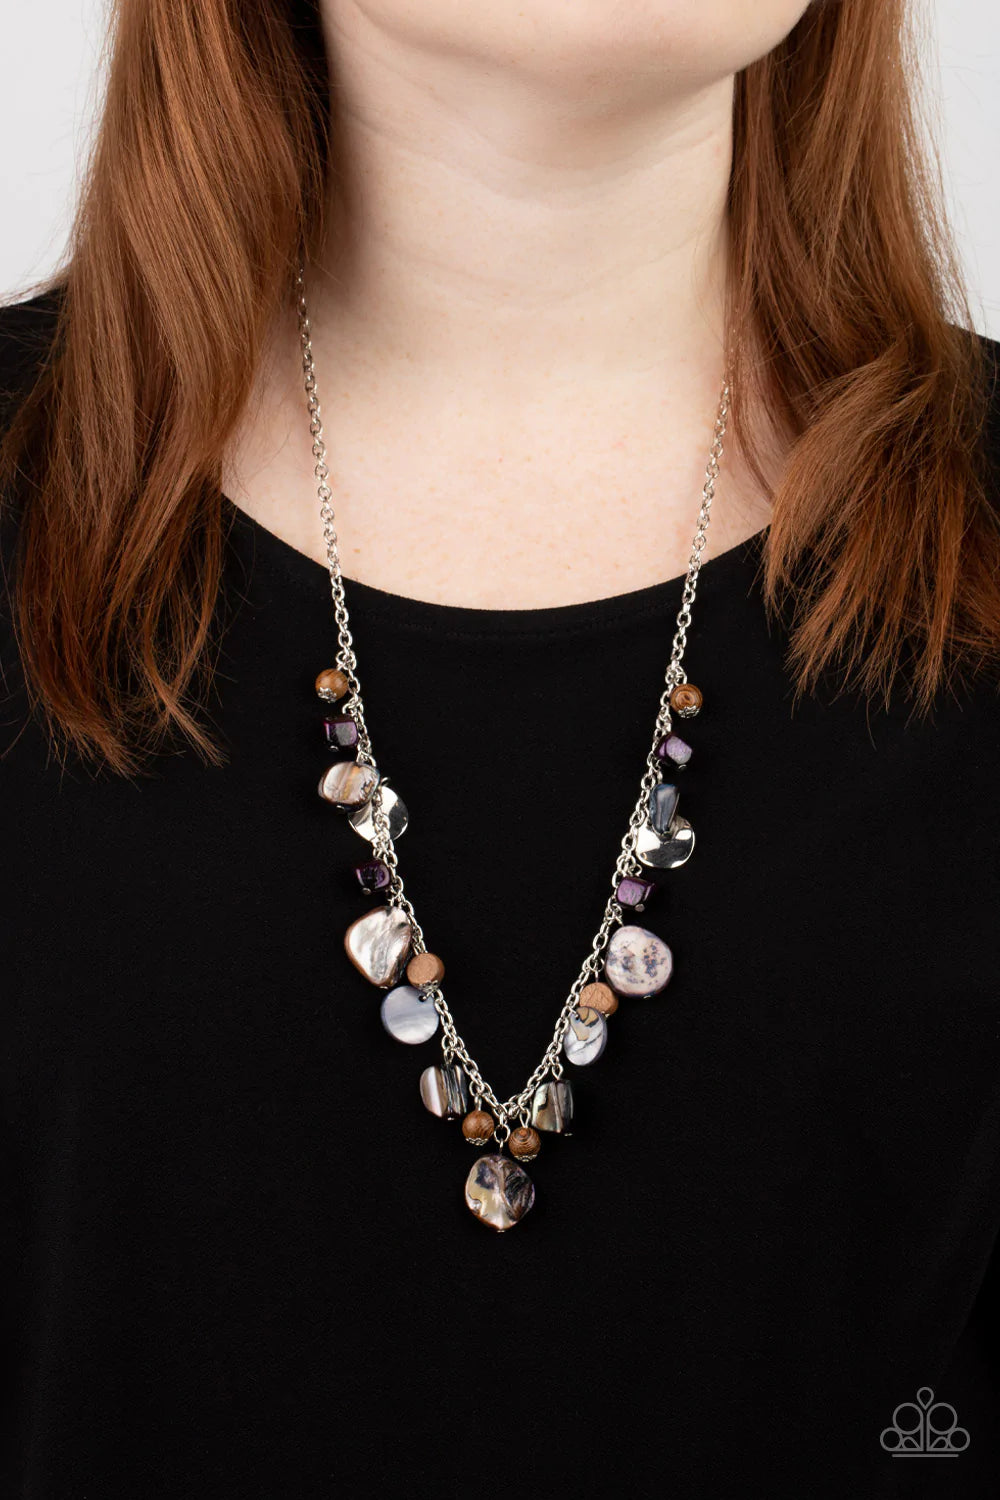 Paparazzi Accessories Caribbean Charisma - Purple A mismatched collection of warped silver discs, brown wooden beads, and iridescent shell-like rock accents dances from the bottom of a classic silver chain, creating a tropical sensation across the chest.